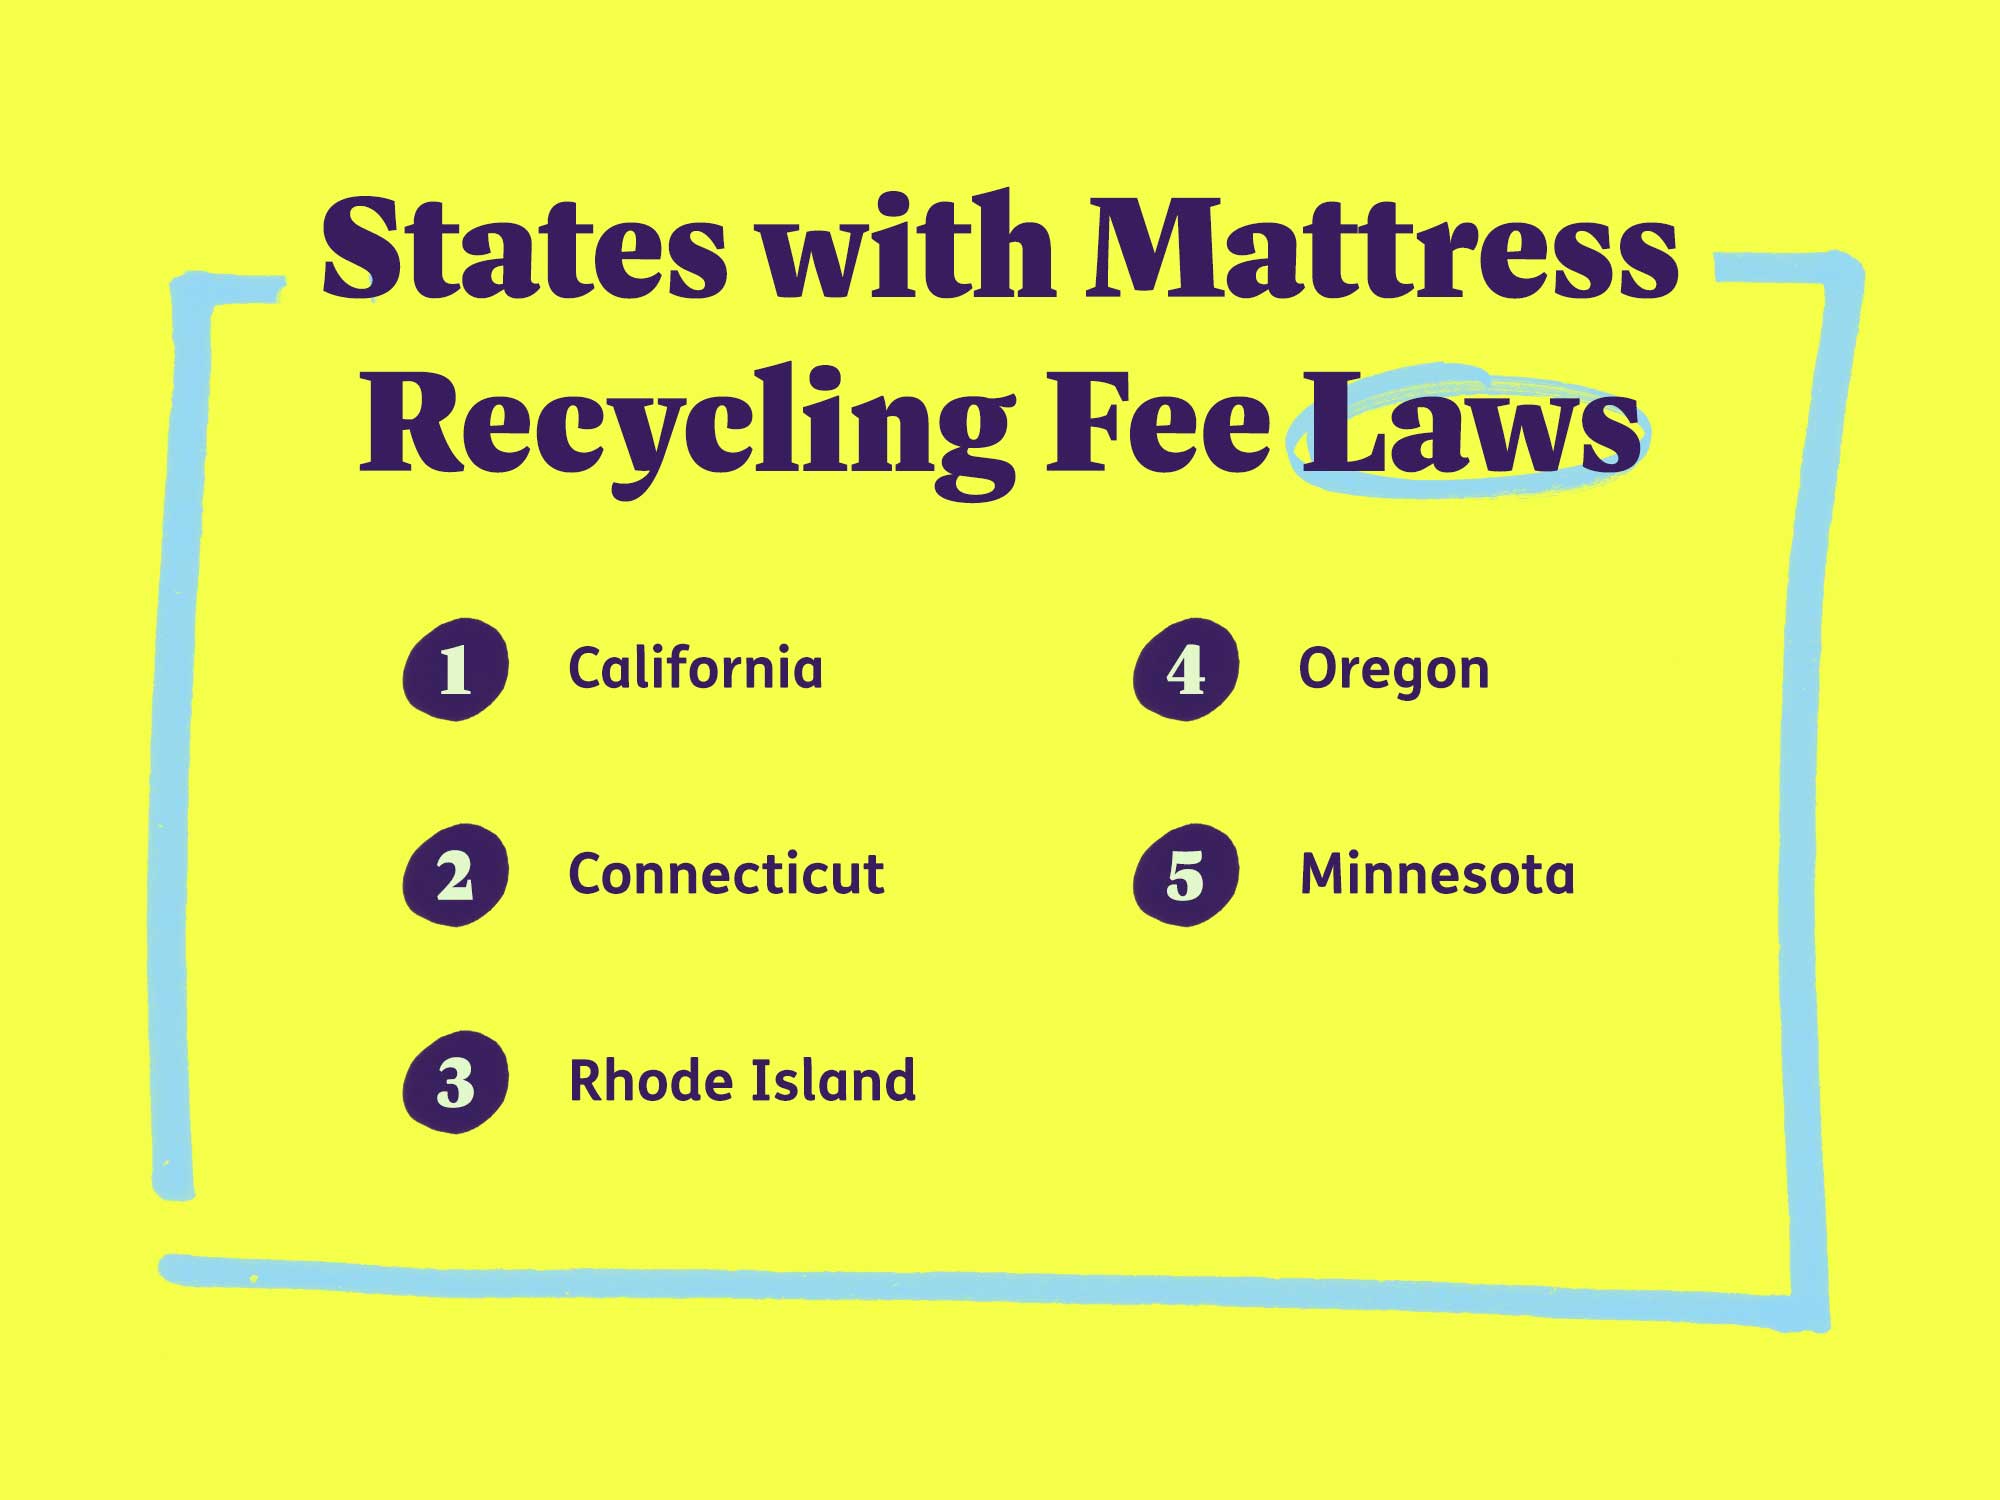 States with mattress recycling fee laws include California, Connecticut, Rhode Island, Oregon, and Minnesota